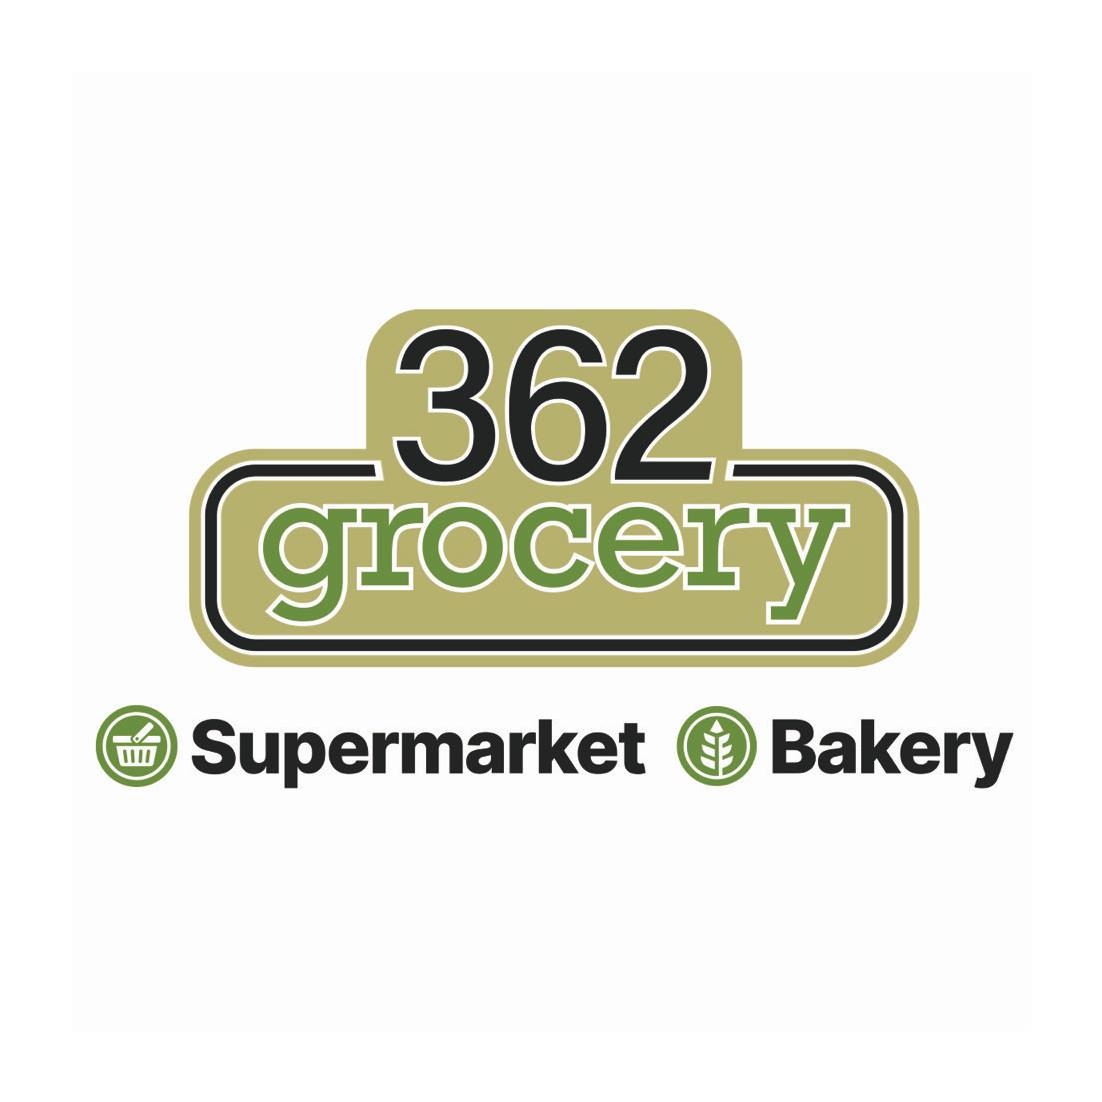 362 grocery